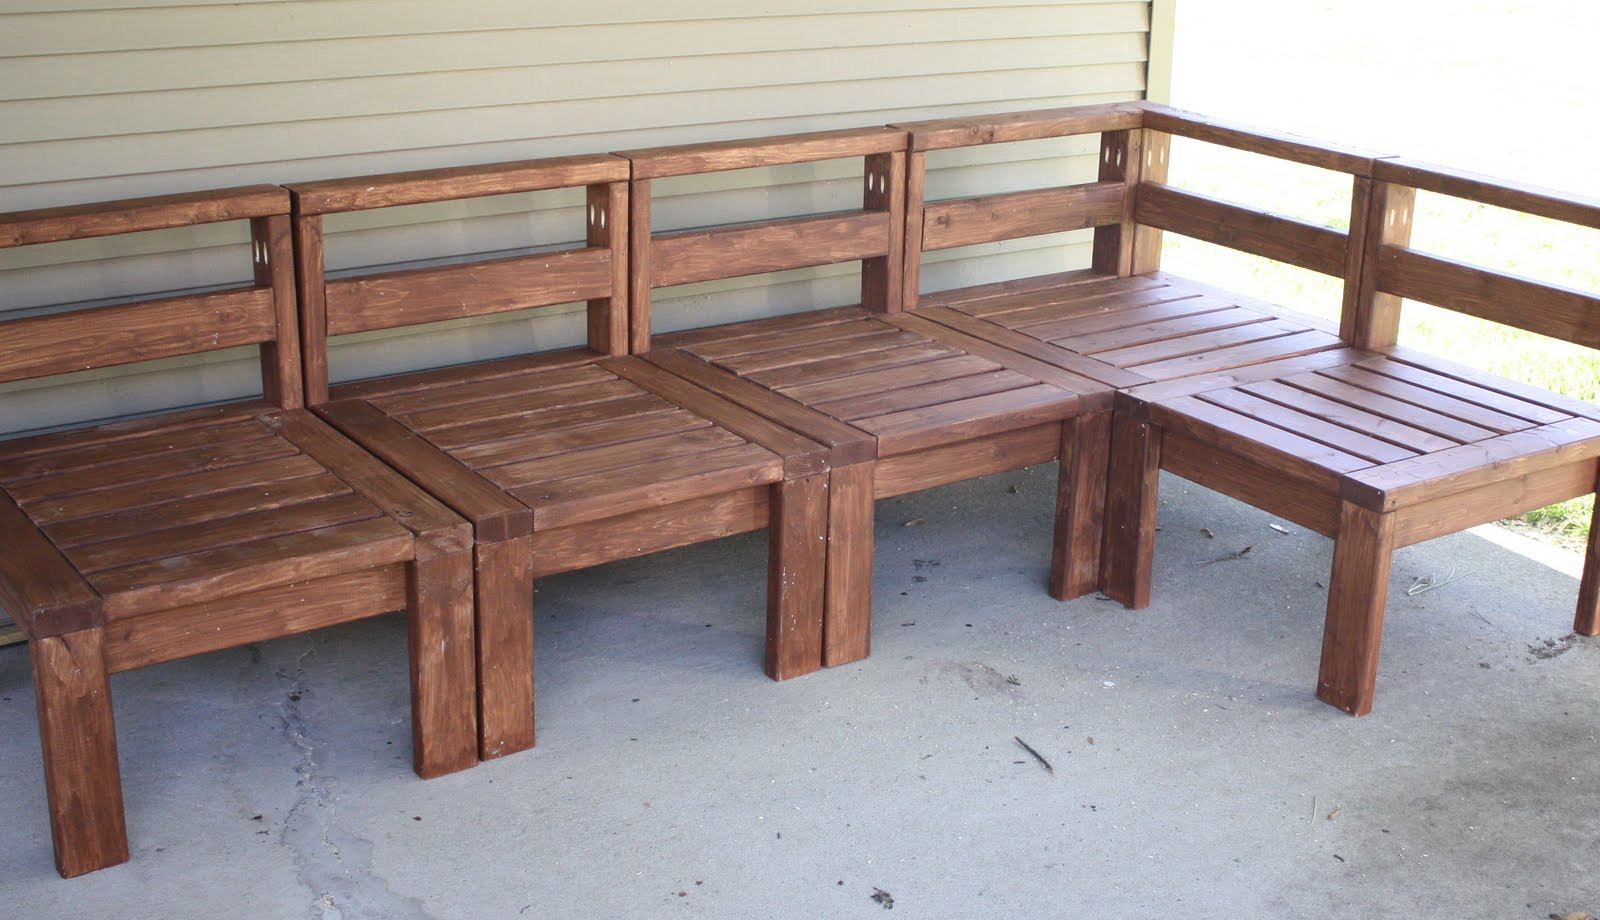 DIY Outdoor Furniture Plans
 More Like Home 2x4 Outdoor Sectional